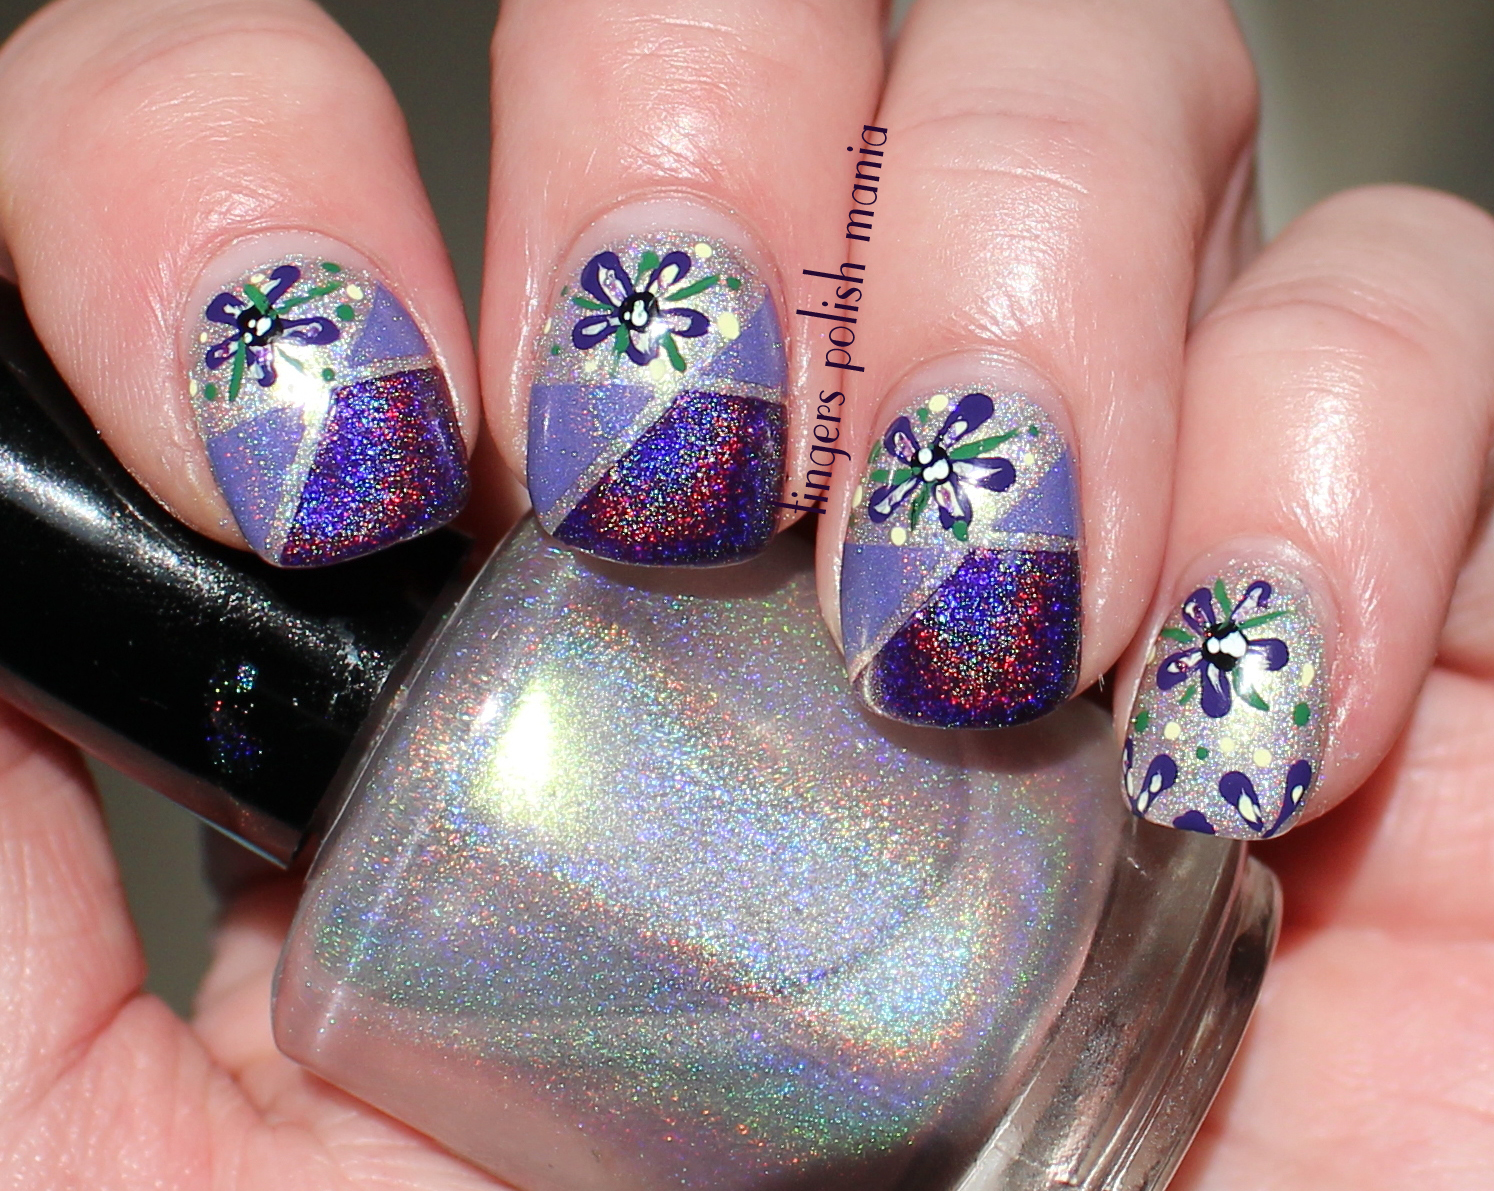 fingers polish mania: Enchanted Polish Lucy in the Sky with Diamonds ...